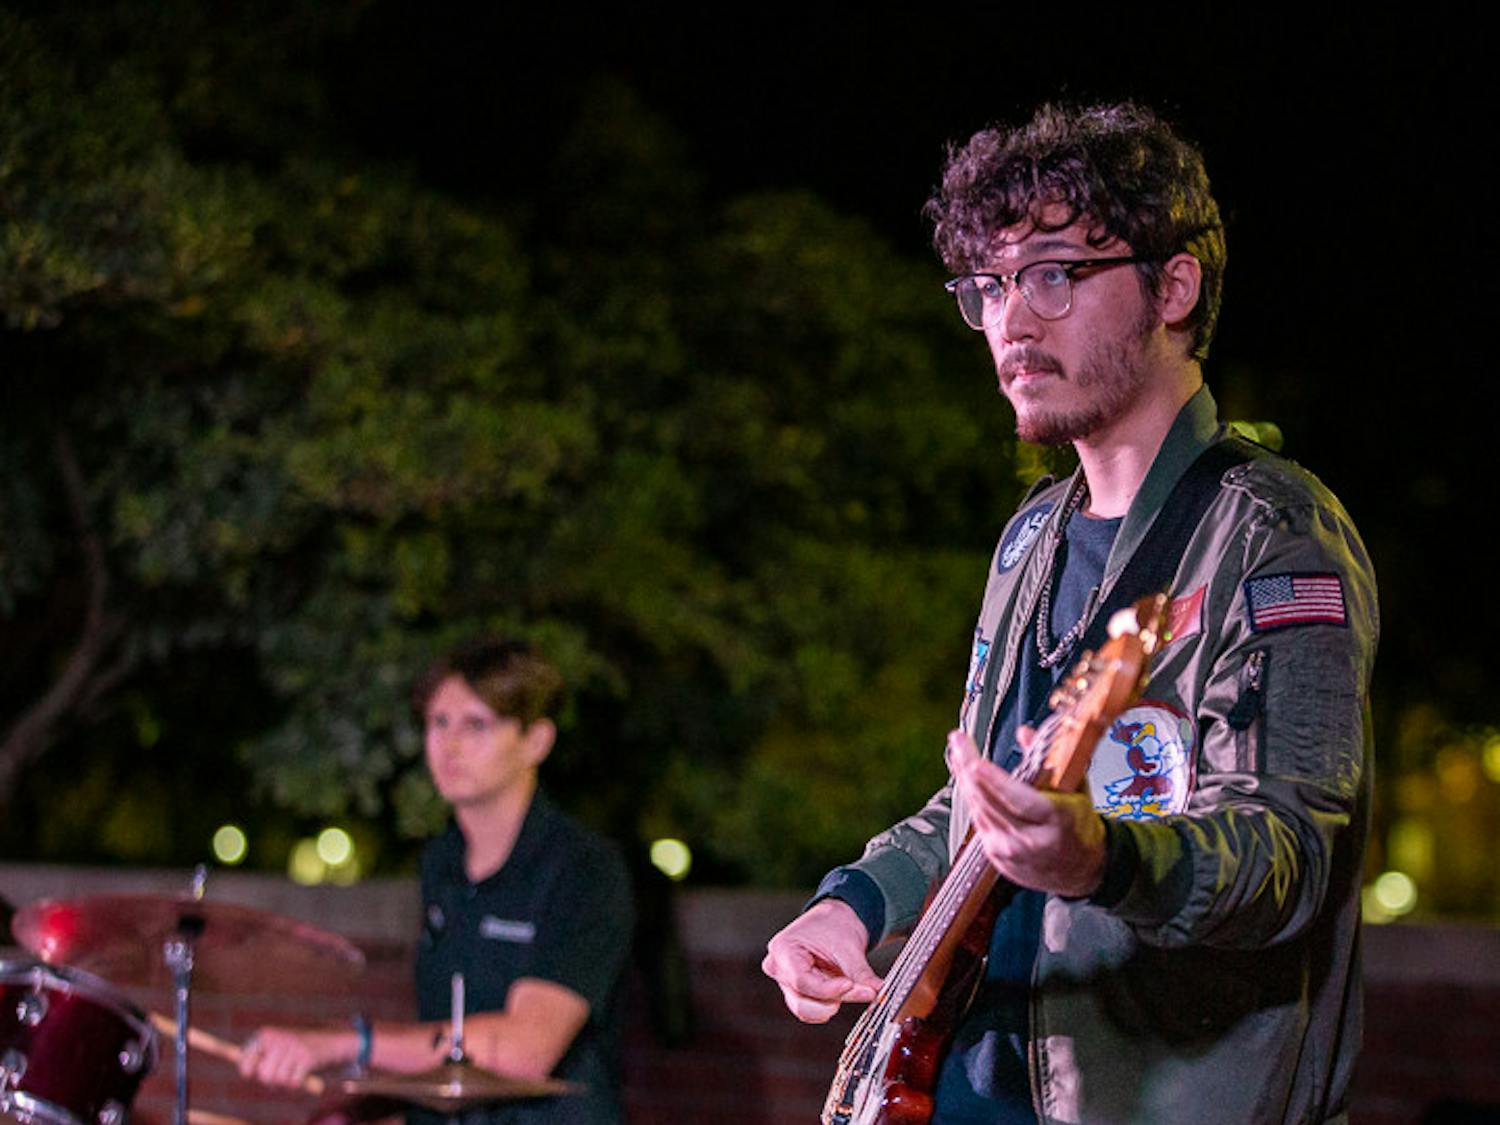 Fourth-year computer science student Sam Lowry (left) and fourth-year psychology and biology student Carson Dick (right), the drummer and bassist for Cockpit perform during the band's set at the Battle of the Bands on Oct. 5, 2022. &nbsp;The music competition brought a cappella, folk, rap and rock to the Russel House Patio in a variety of performances.&nbsp;